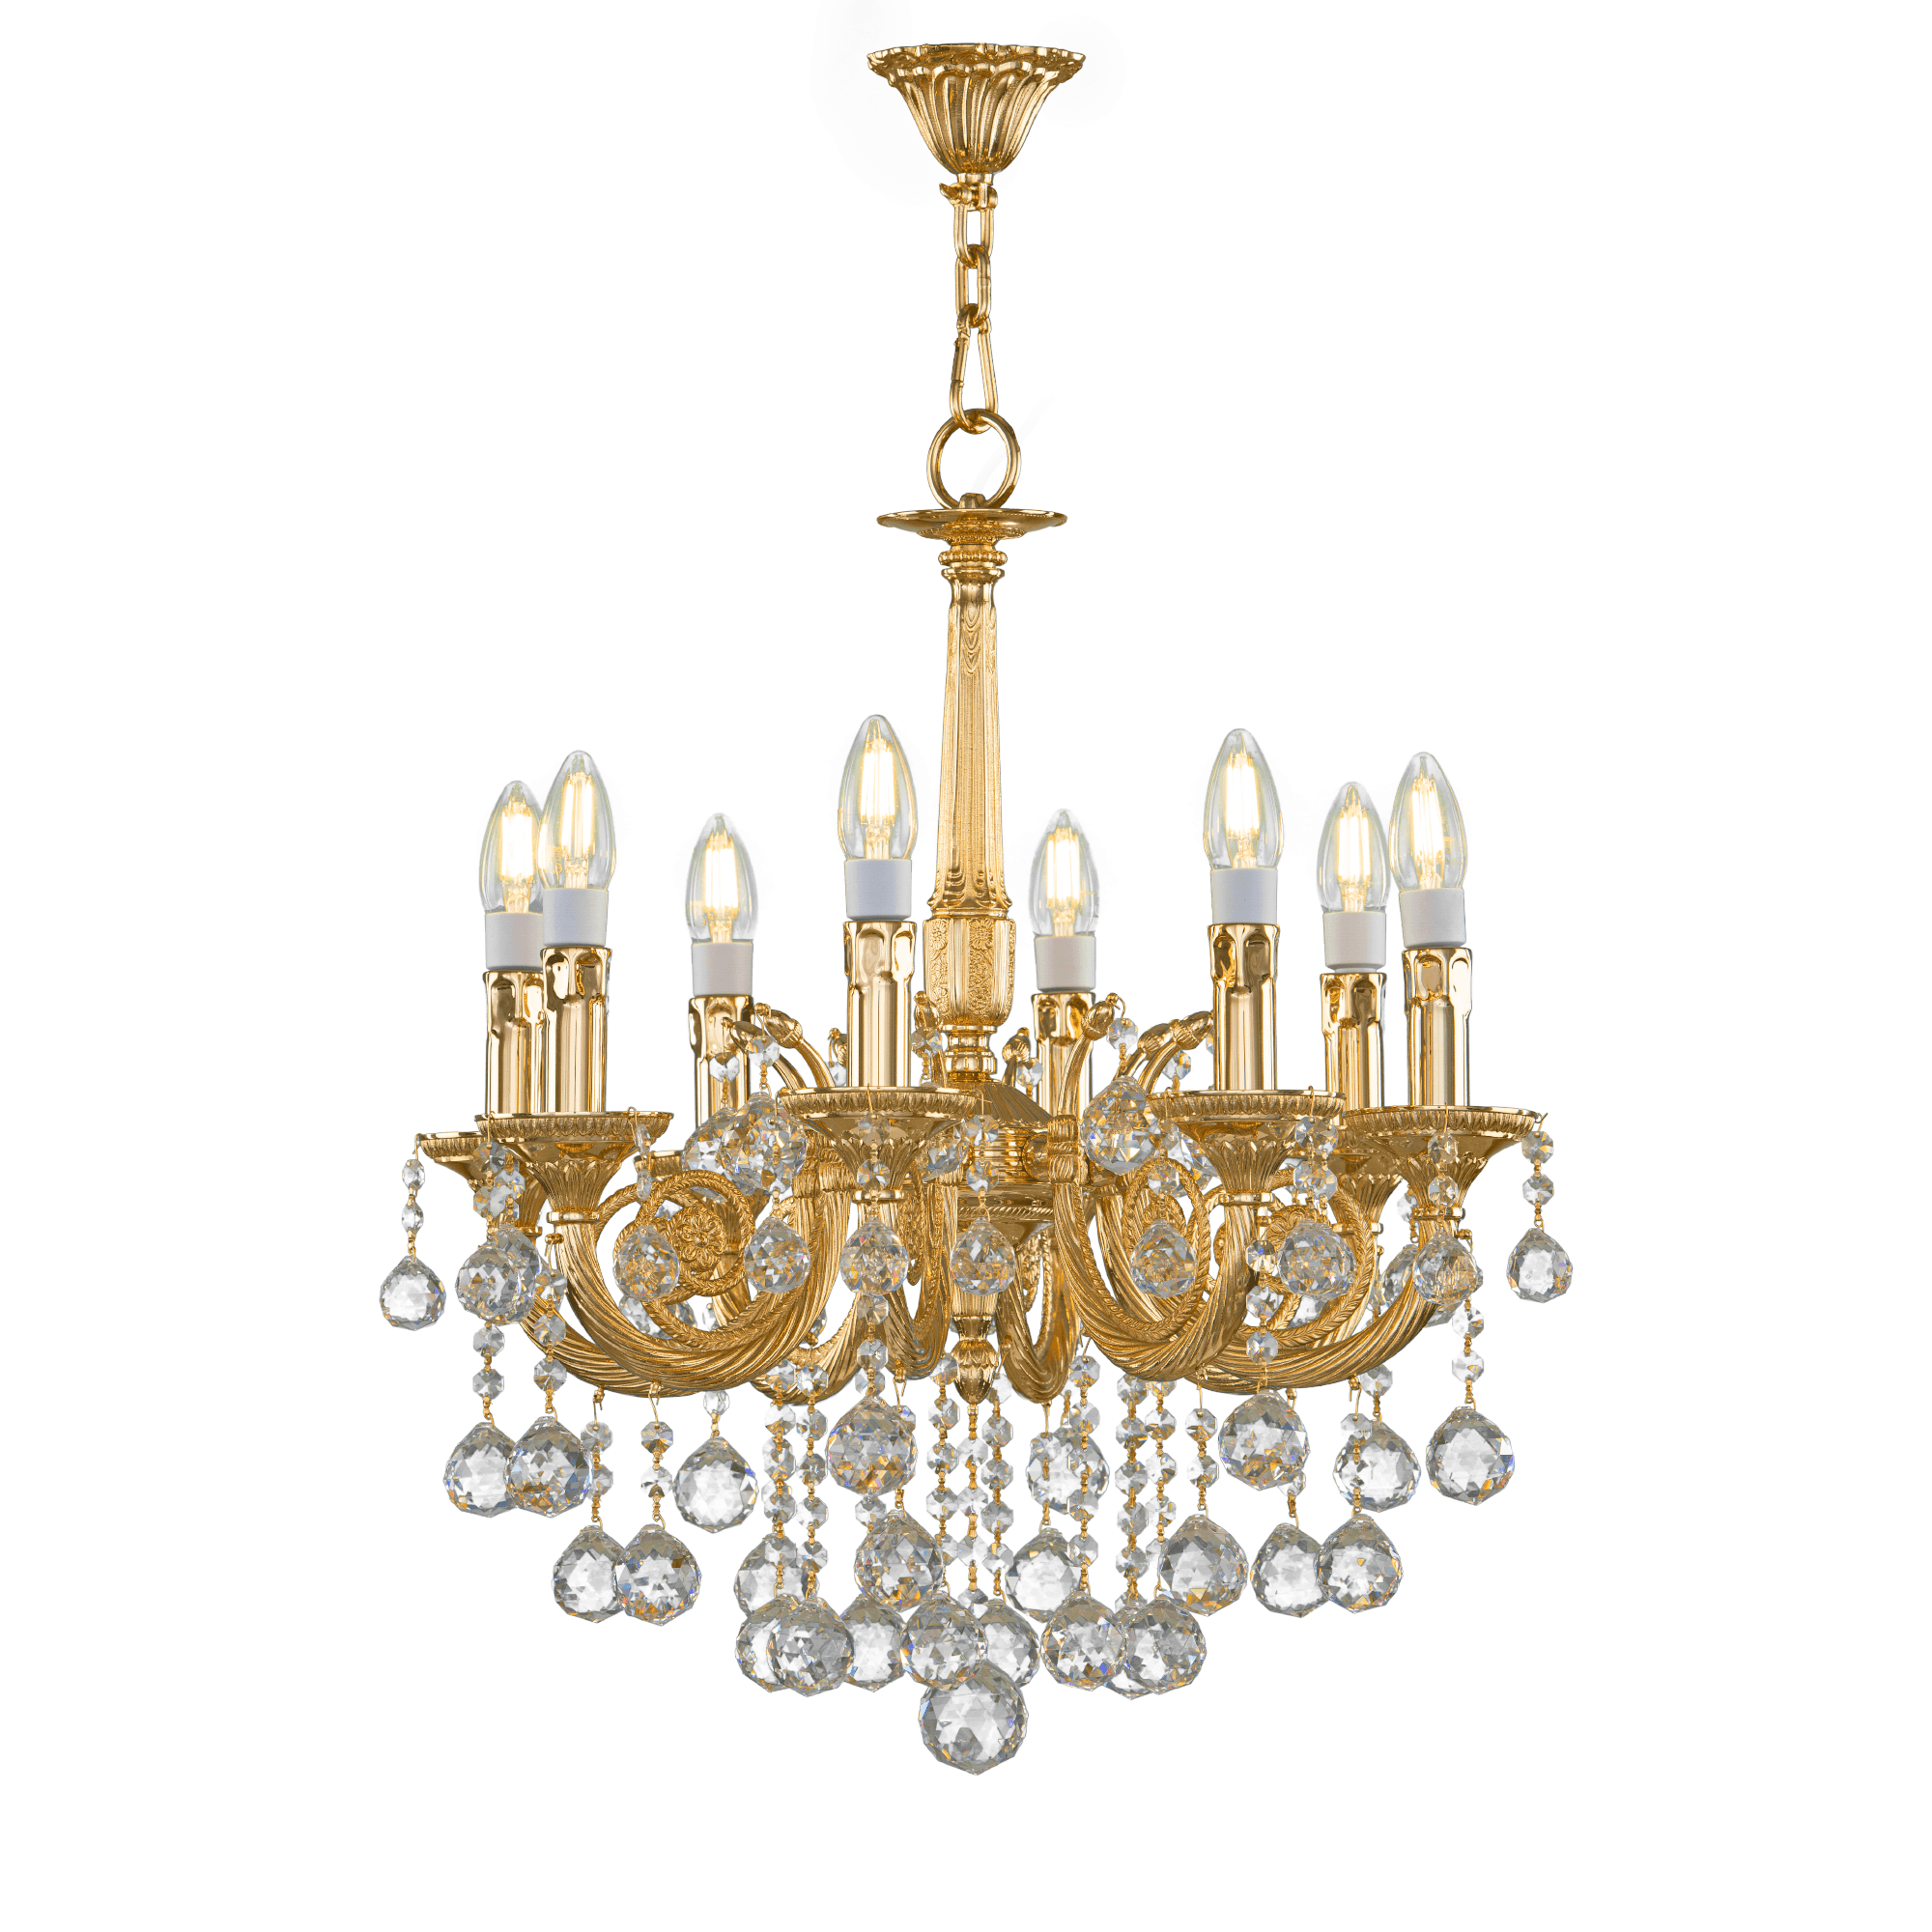 Asfour-Crystal-Lighting-Brass-Collection-Brass-Chandelier-8-Bulbs-Gold